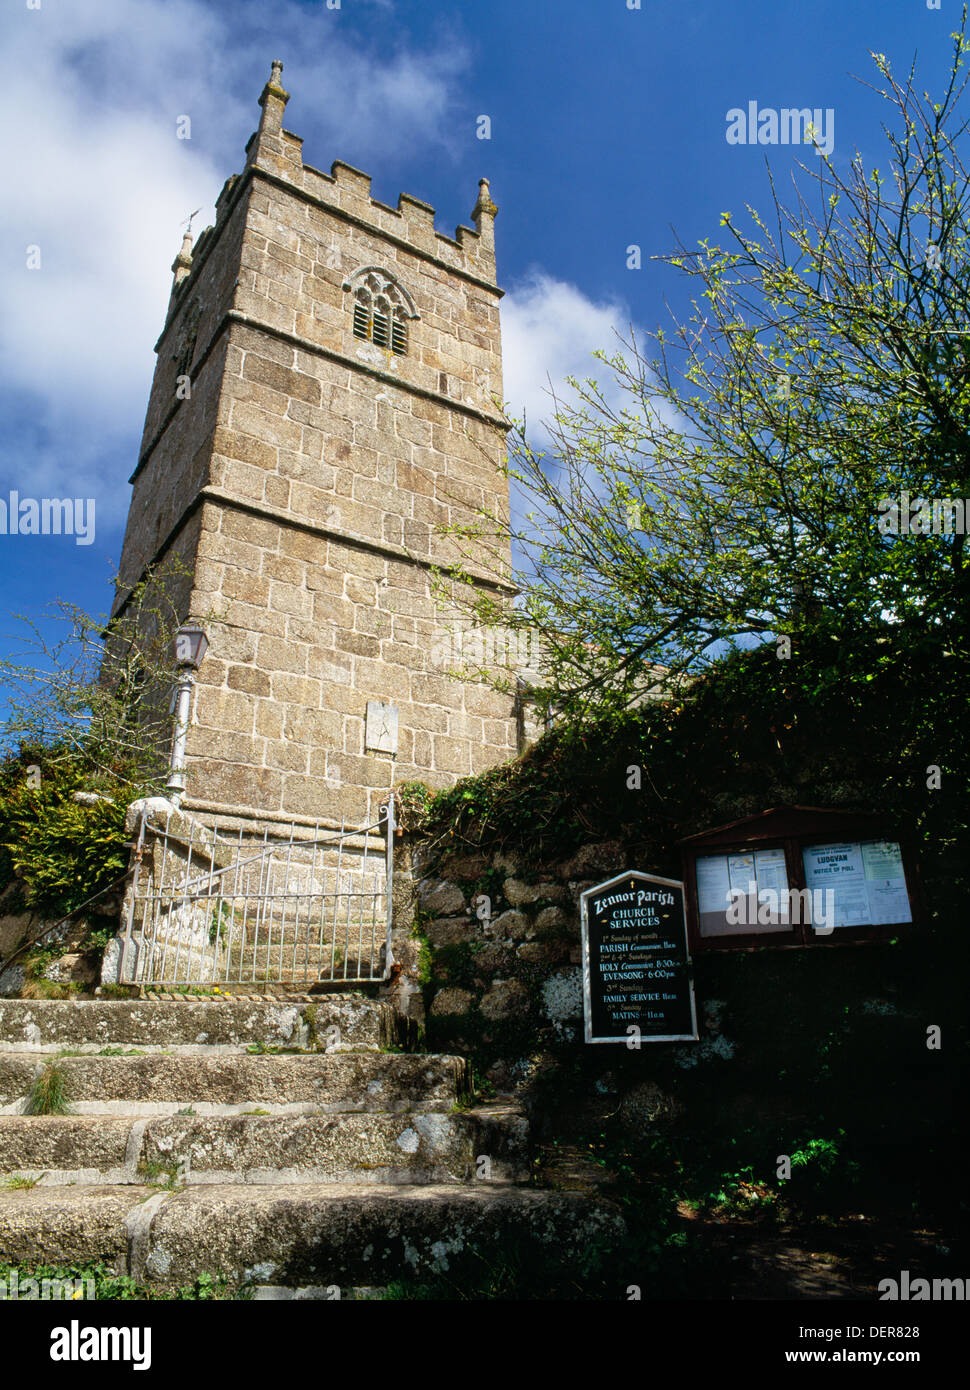 Looking up at the churchyard steps and wall, and the C15th Cornish, Perpendicular Gothic, granite ashlar tower of St Senara's Church, Zennor. Stock Photo